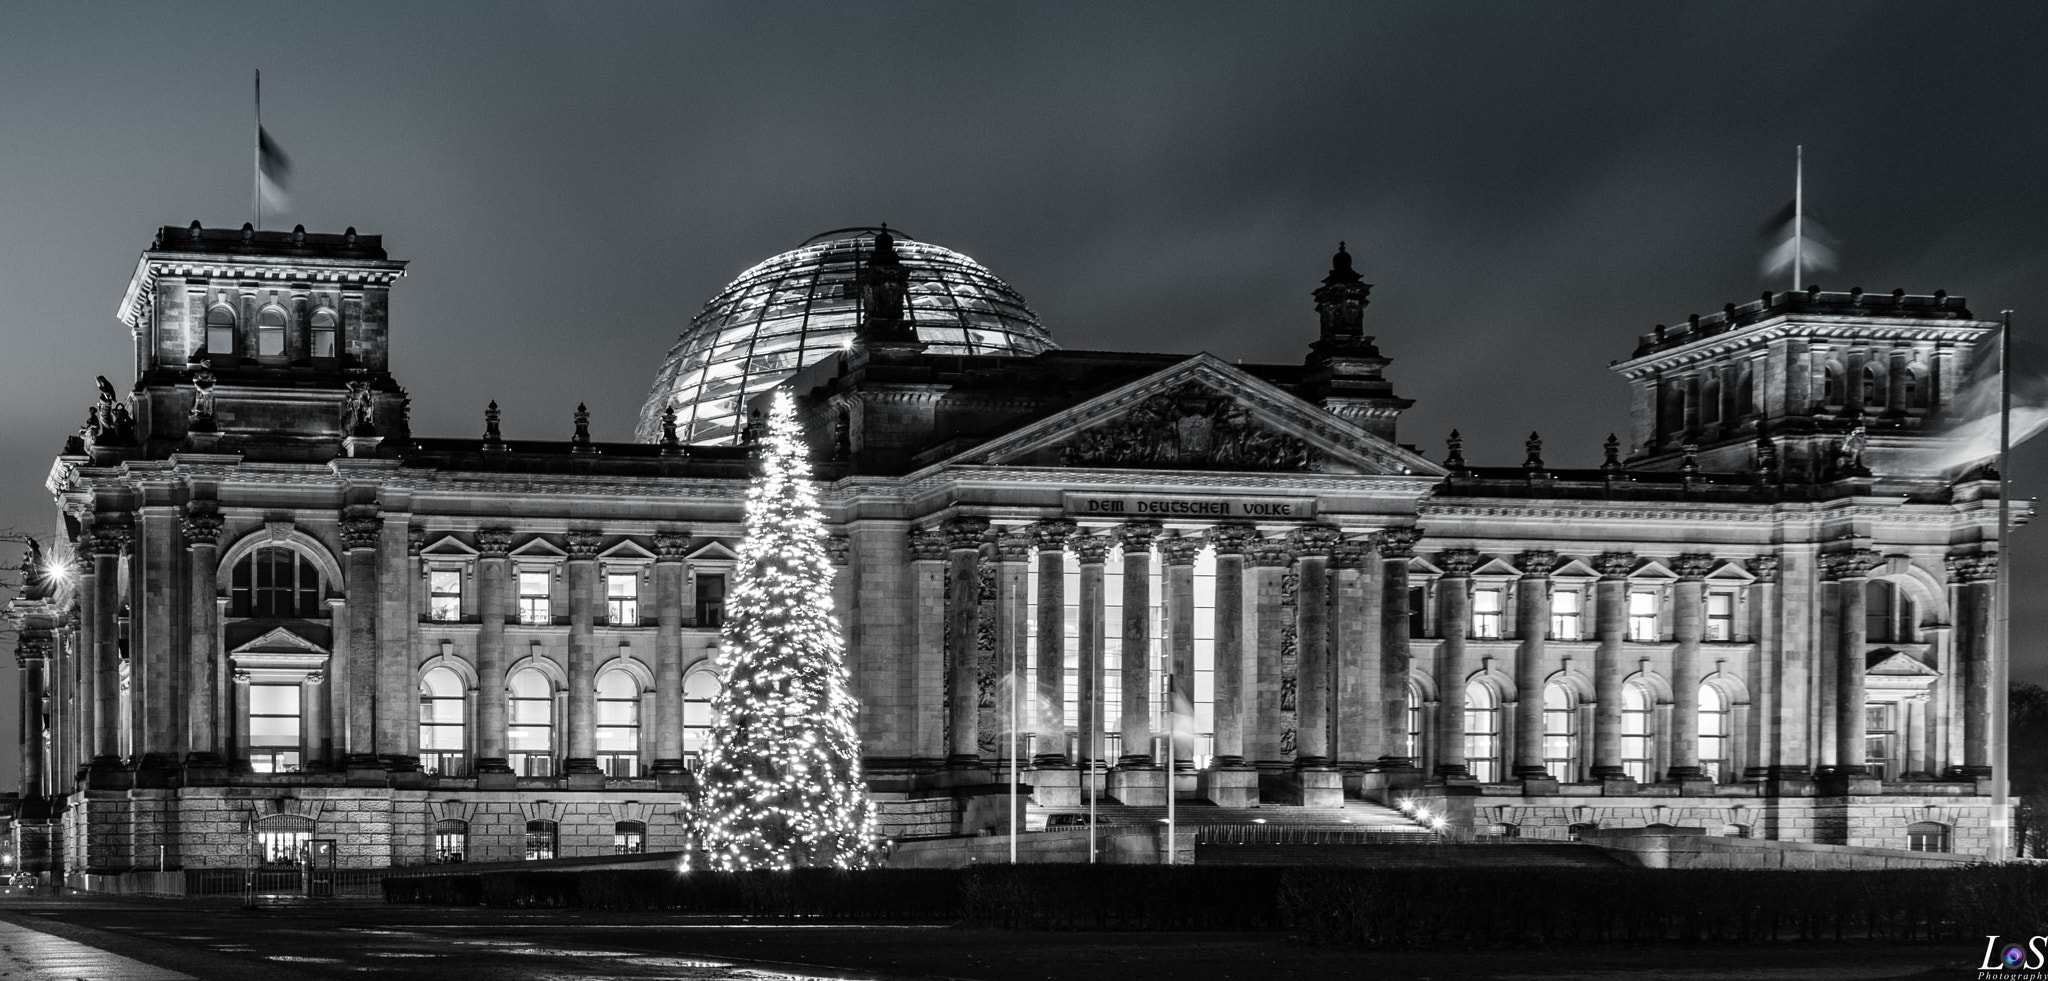 Nikon D5300 + Sigma 17-70mm F2.8-4 DC Macro OS HSM | C sample photo. Reichstag photography